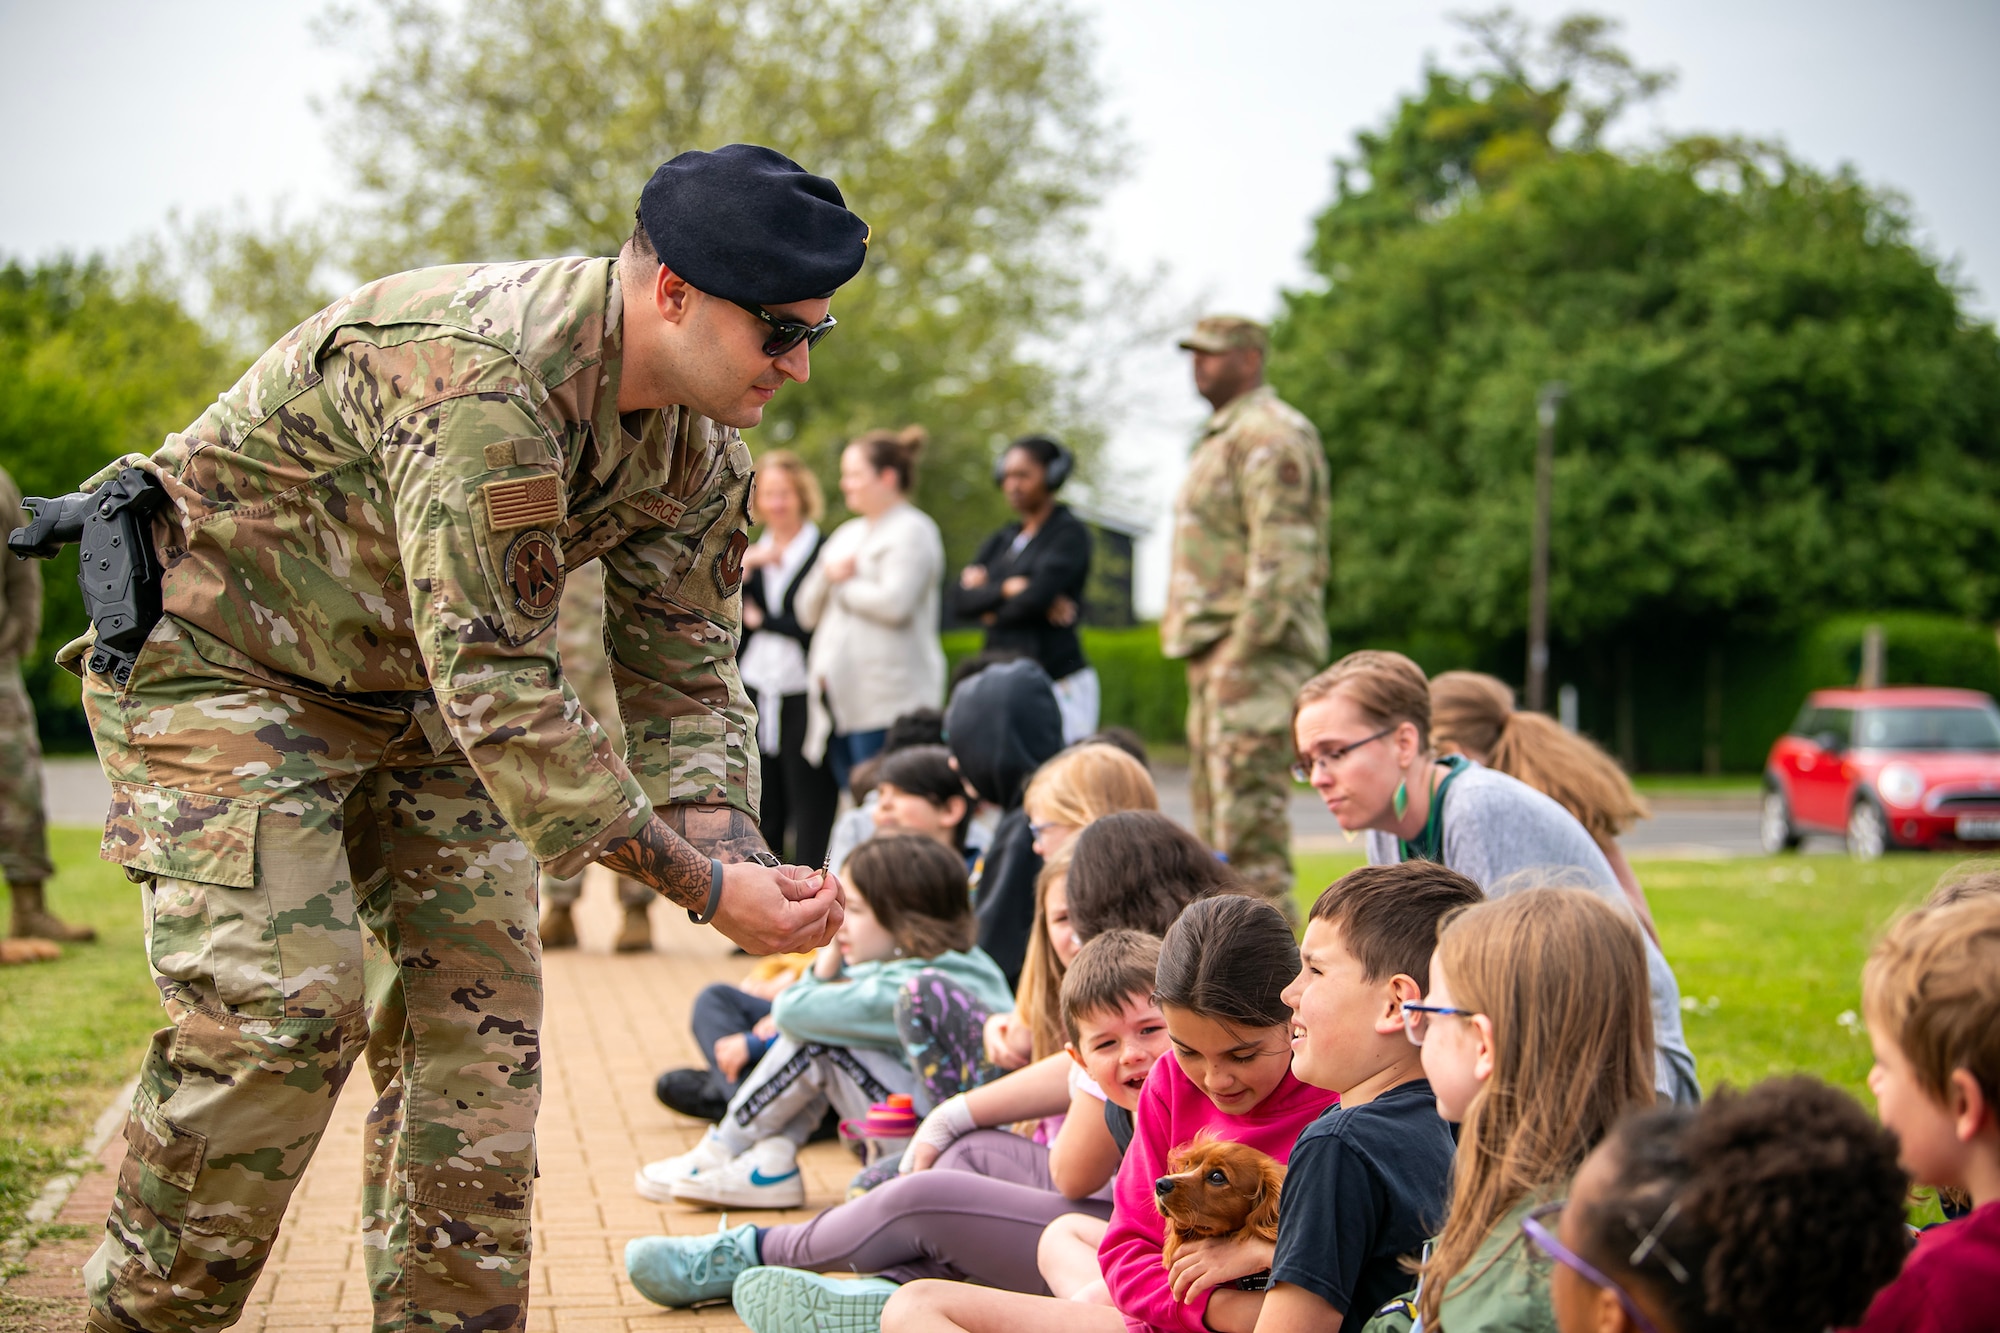 An Airman from the 423d Security Forces Squadron displays taser prongs following a demonstration at RAF Alconbury, England, May 18, 2023. The demonstration was a part of National Police Week where members from SFS engaged with and demonstrated police capabilities to students from Alconbury Elementary school. (U.S. Air Force photo by Staff Sgt. Eugene Oliver)